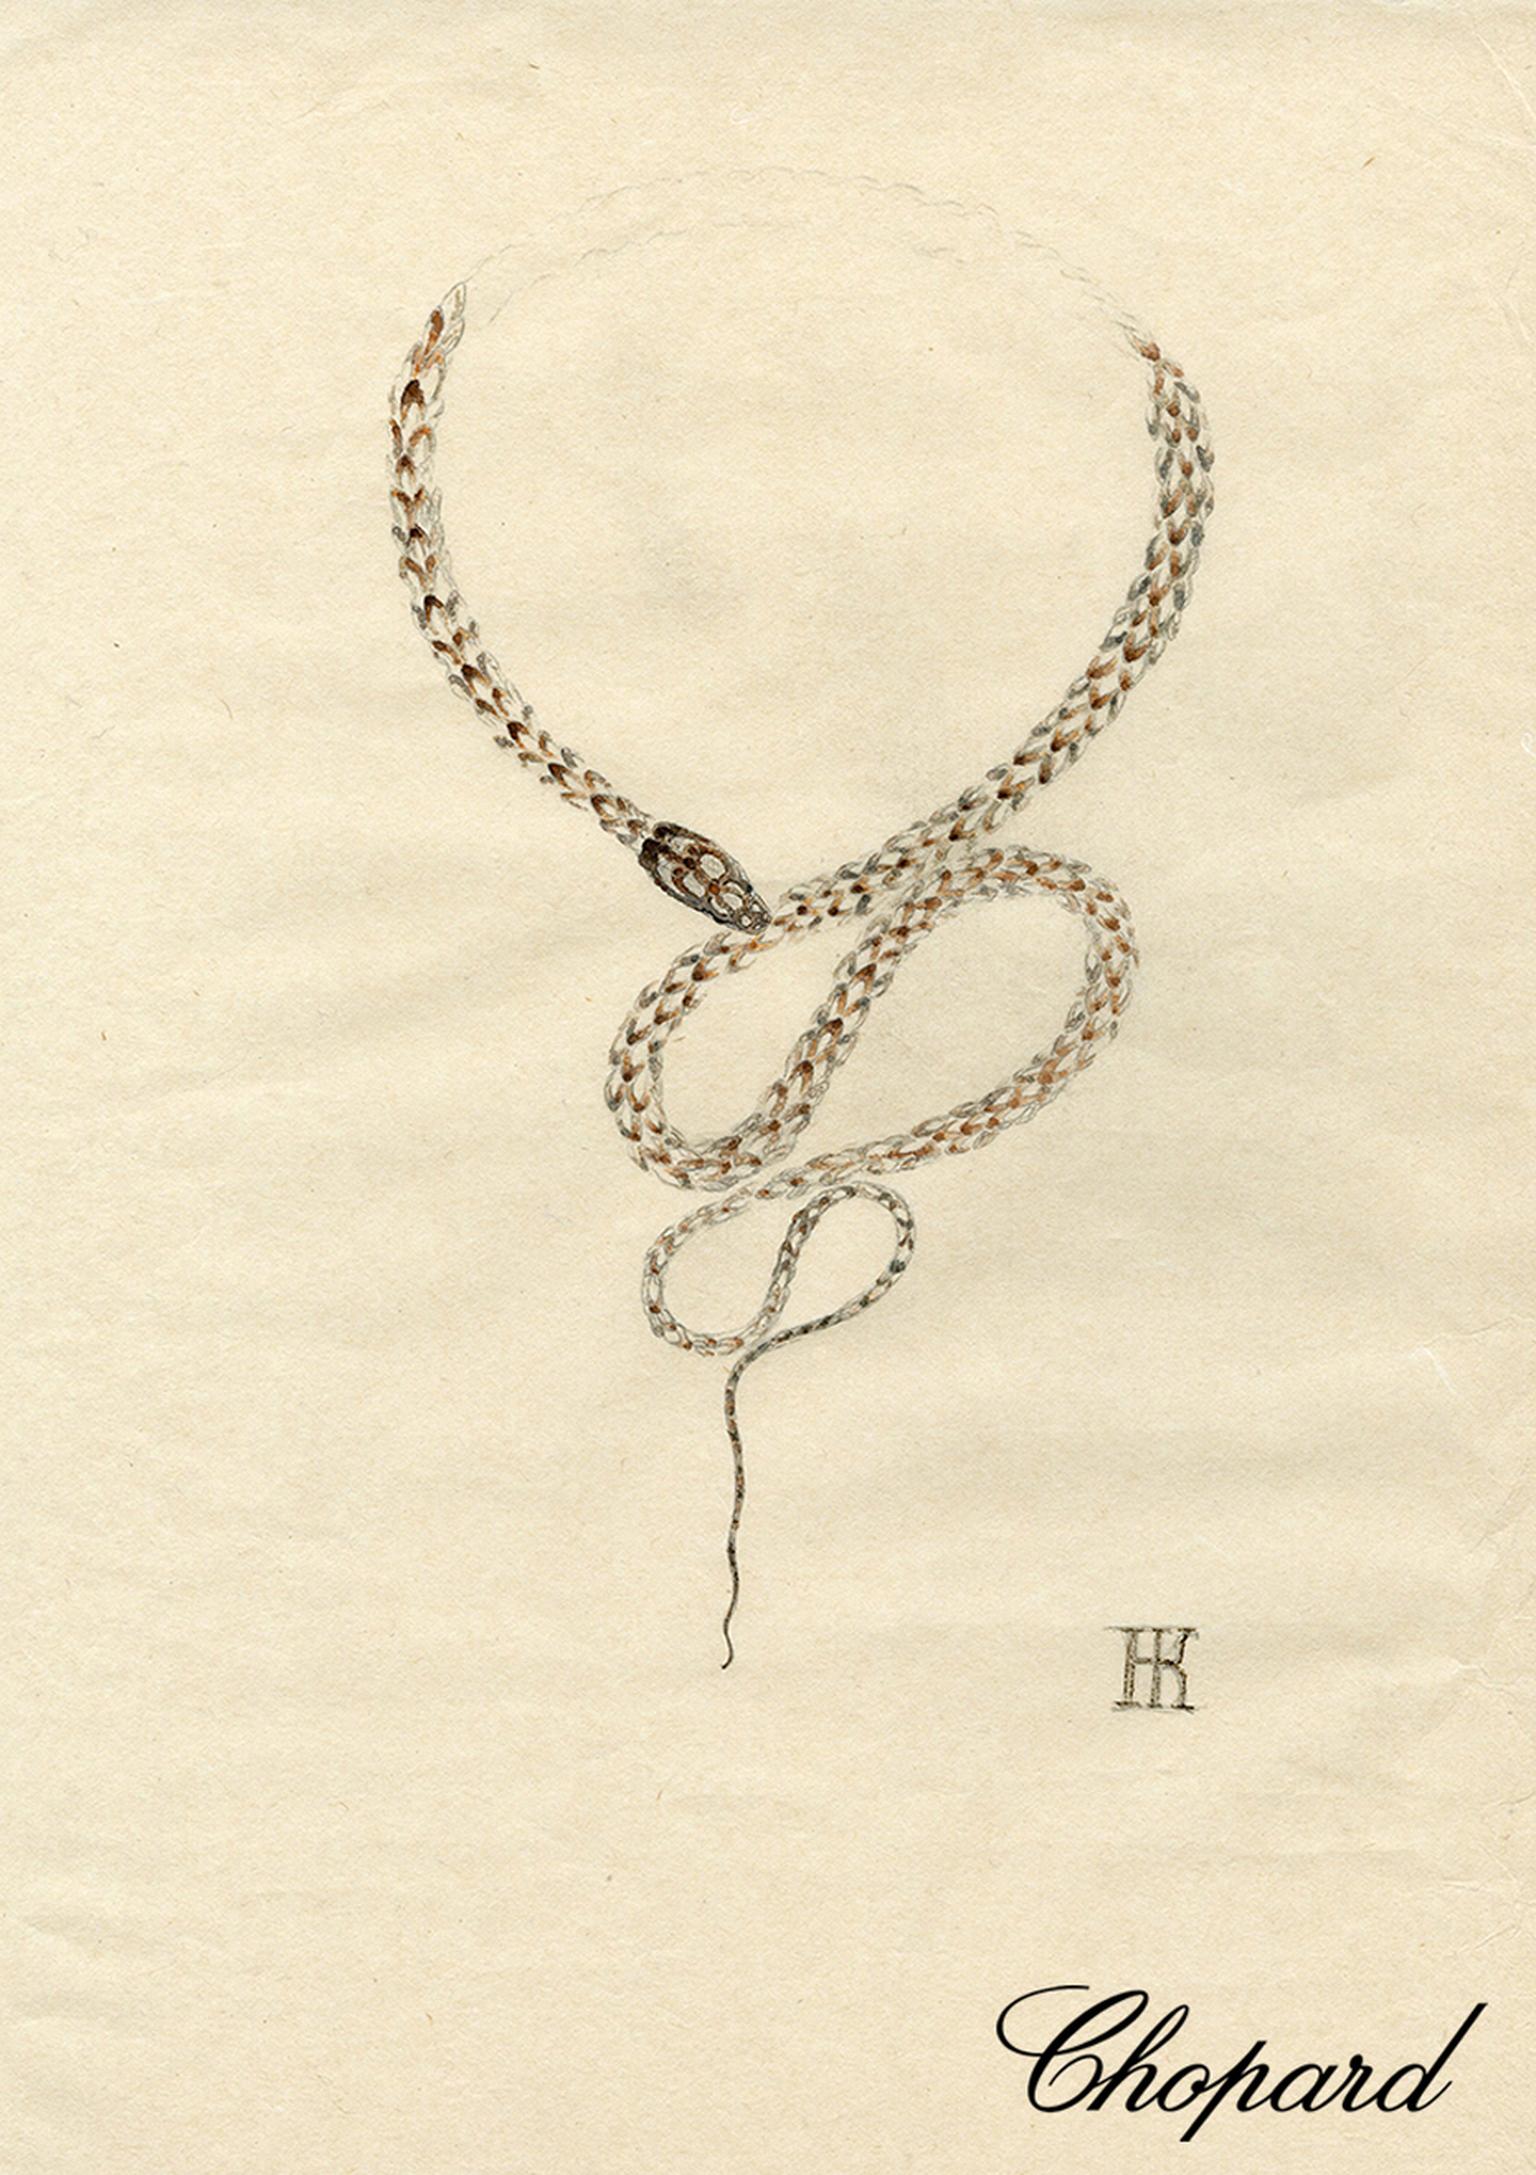 An original sketch of Harumi's Snake necklace for Chopard.